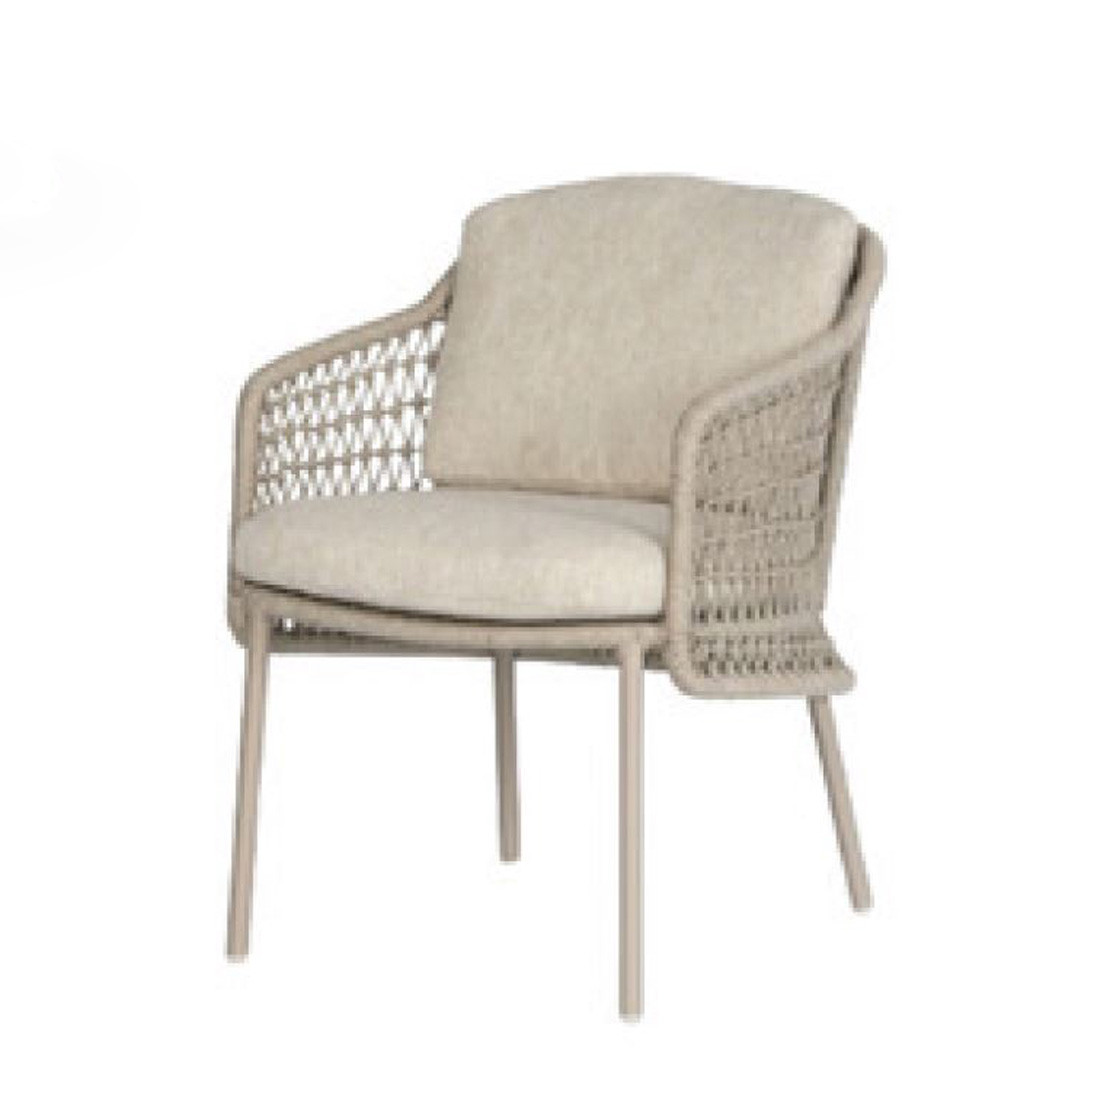 Puccini dining chair latte with 2 cushions